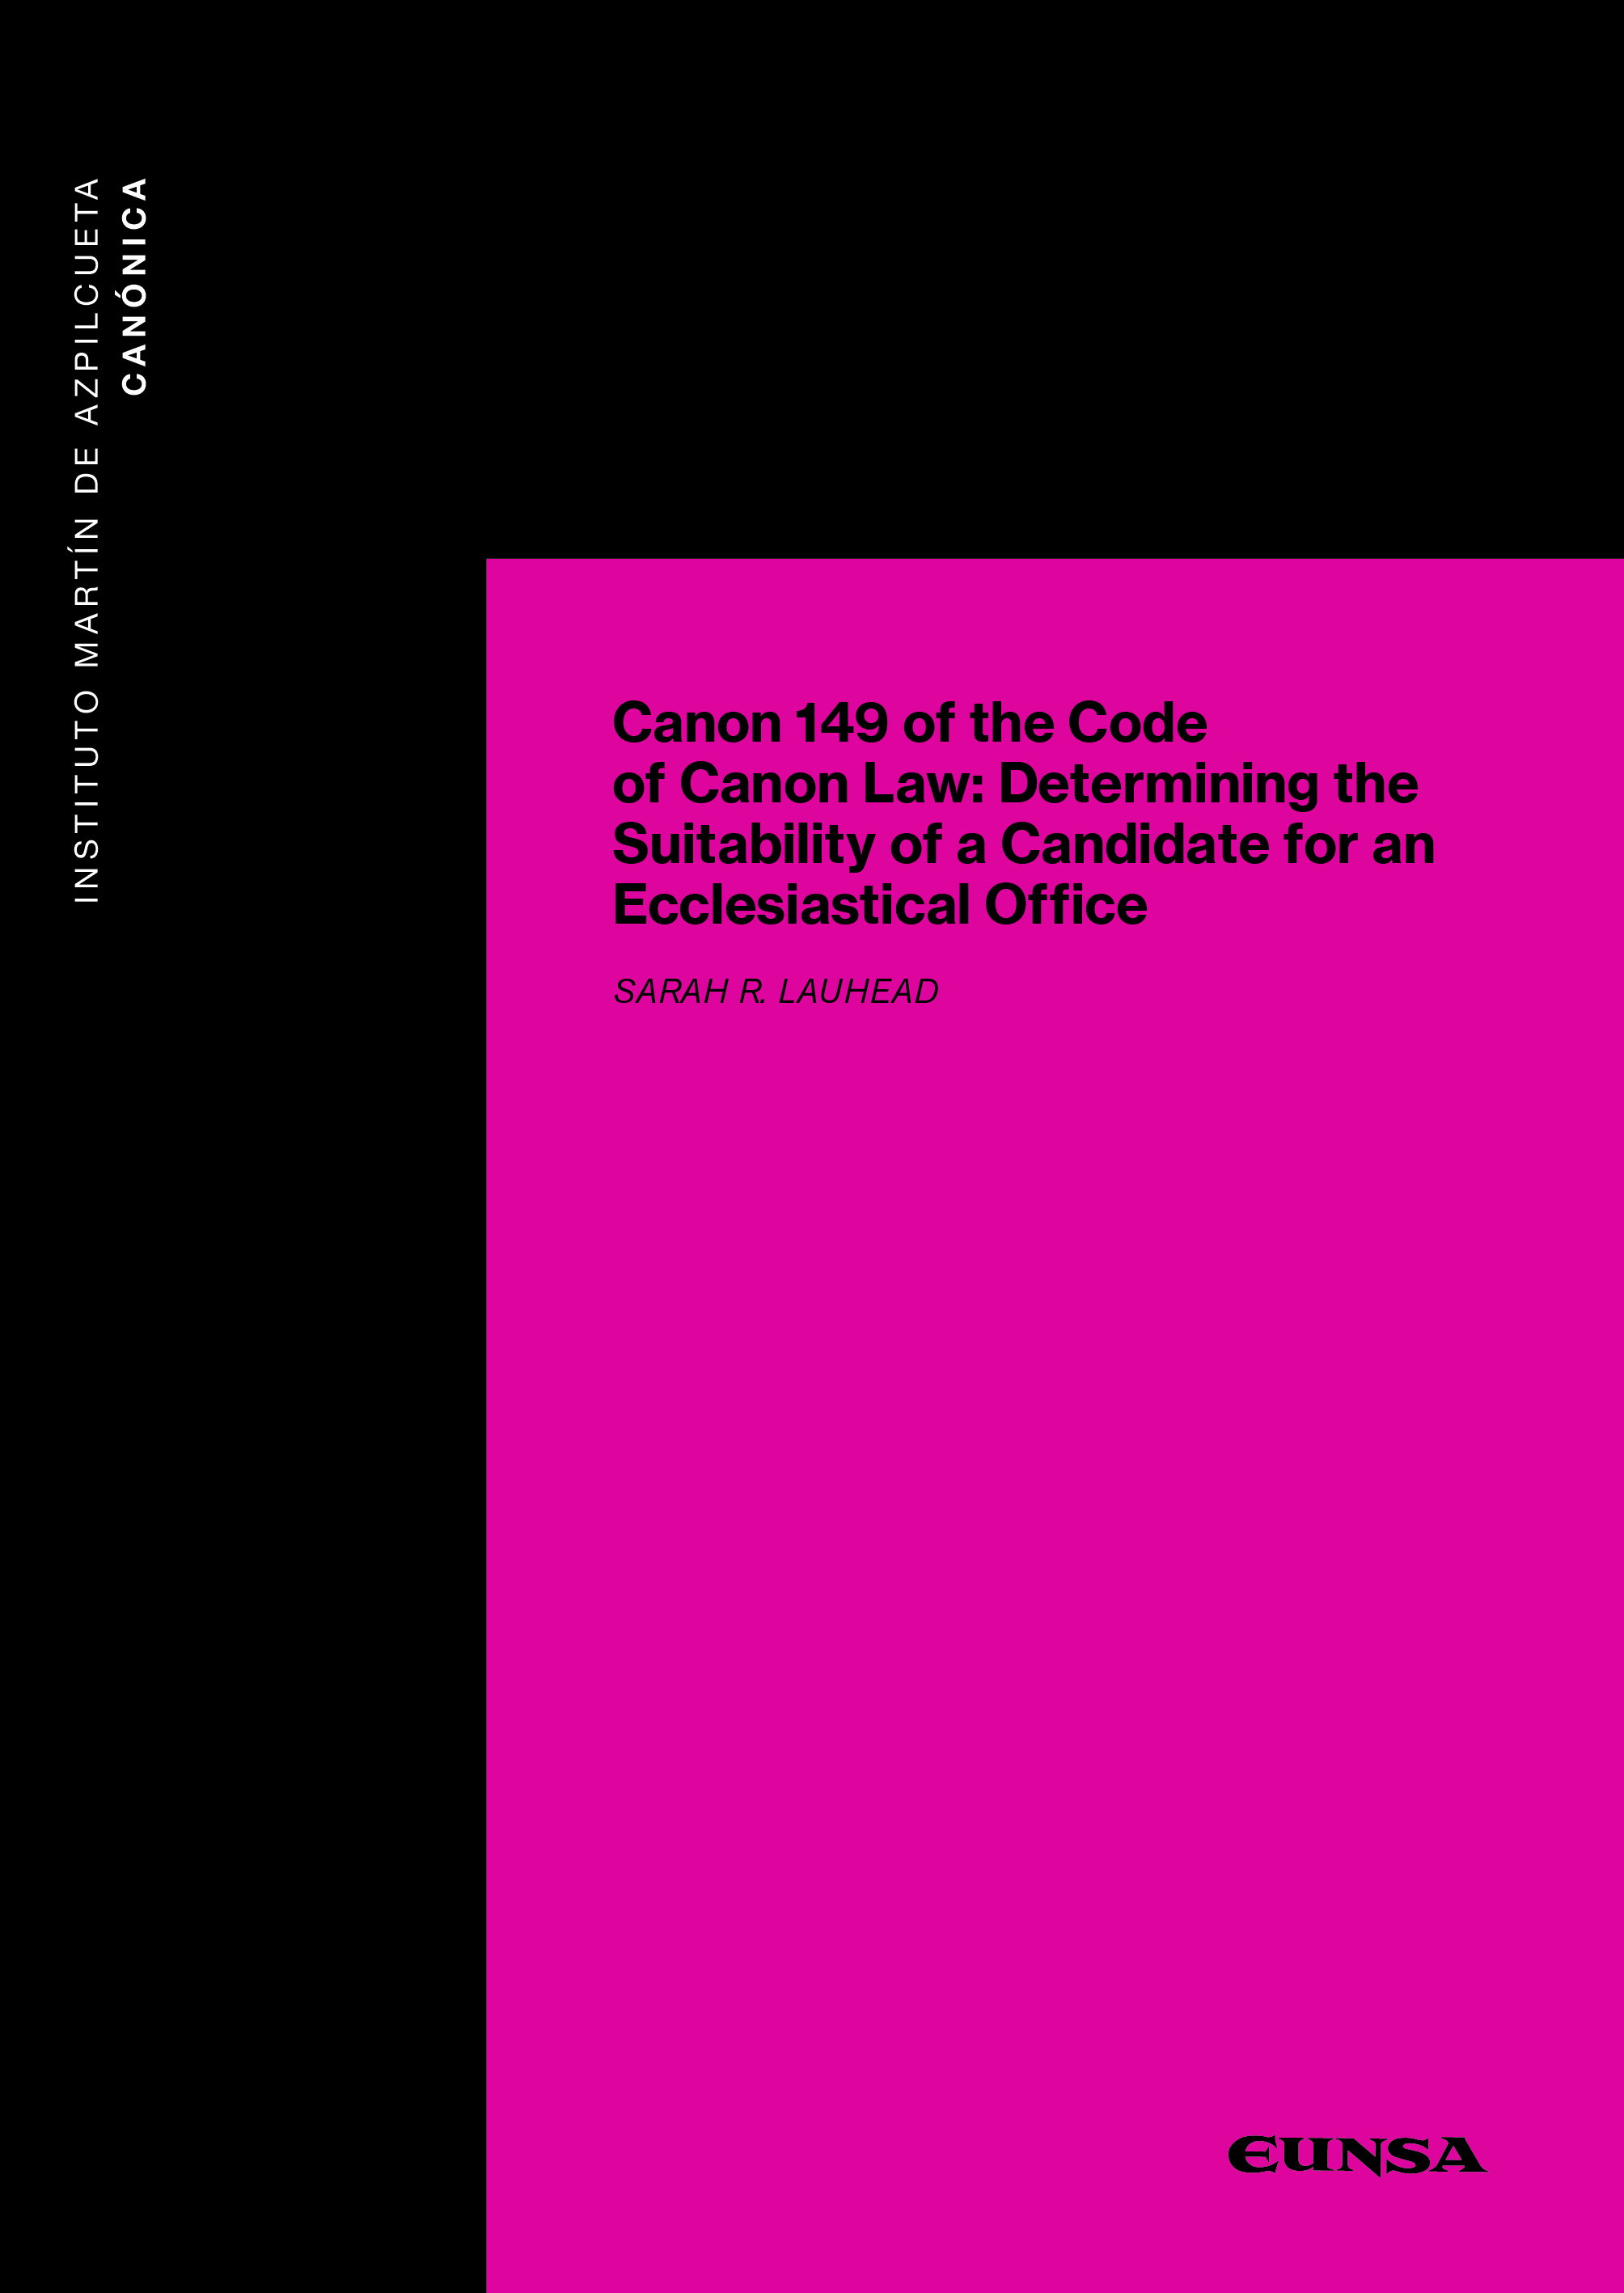 CANON 149 OF THE CODE OF CANON LAW